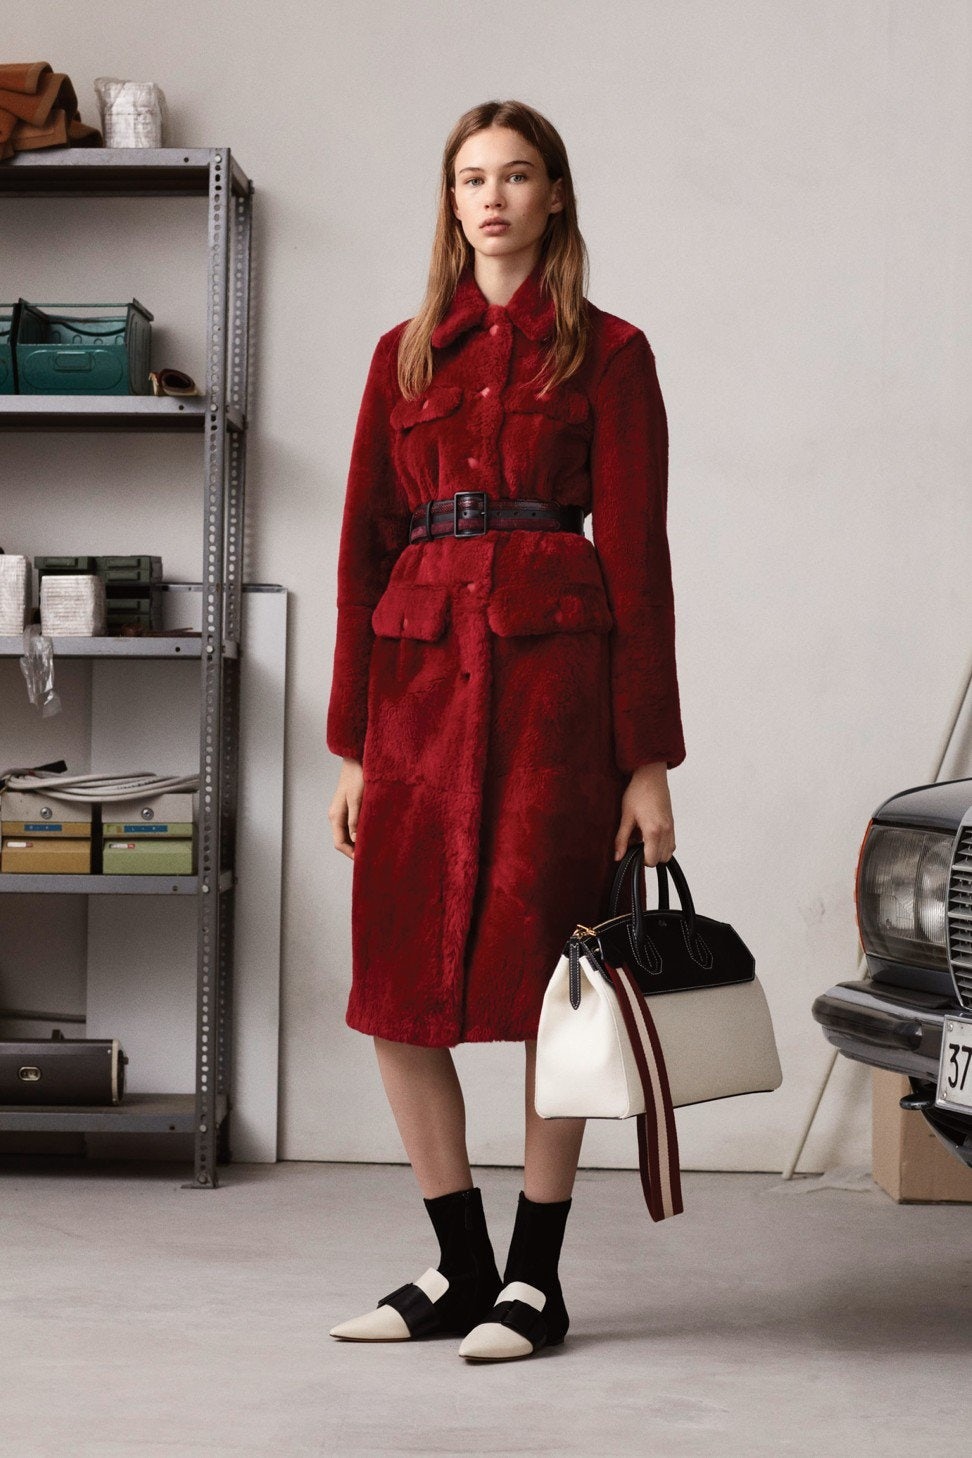 A look from Bally’s autumn/winter 2018-19 women’s collection. Chinese textile and apparel producer Shandong Ruyi Group now has a controlling share in Bally.